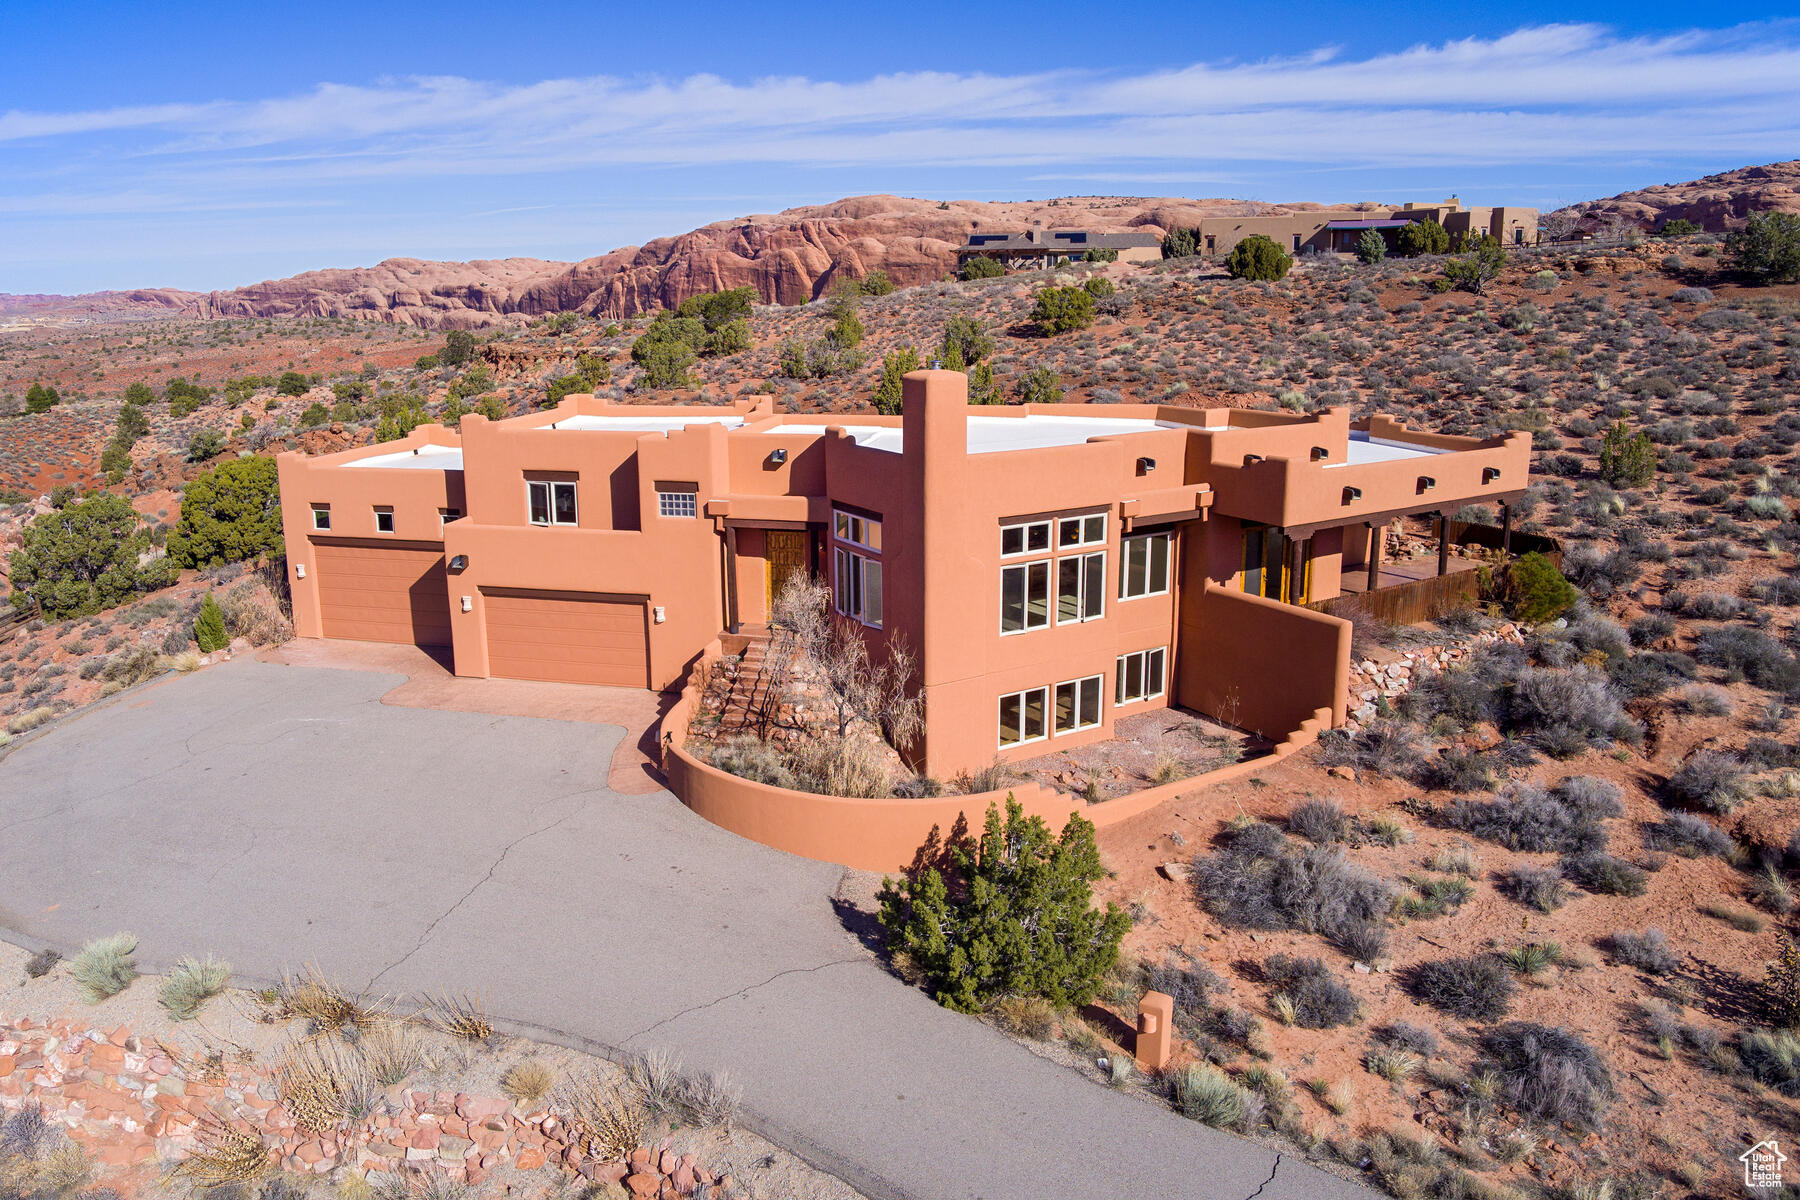 3137 E GEORGE WHITE, Moab, Utah 84532, 3 Bedrooms Bedrooms, 14 Rooms Rooms,3 BathroomsBathrooms,Residential,For sale,GEORGE WHITE,1985608